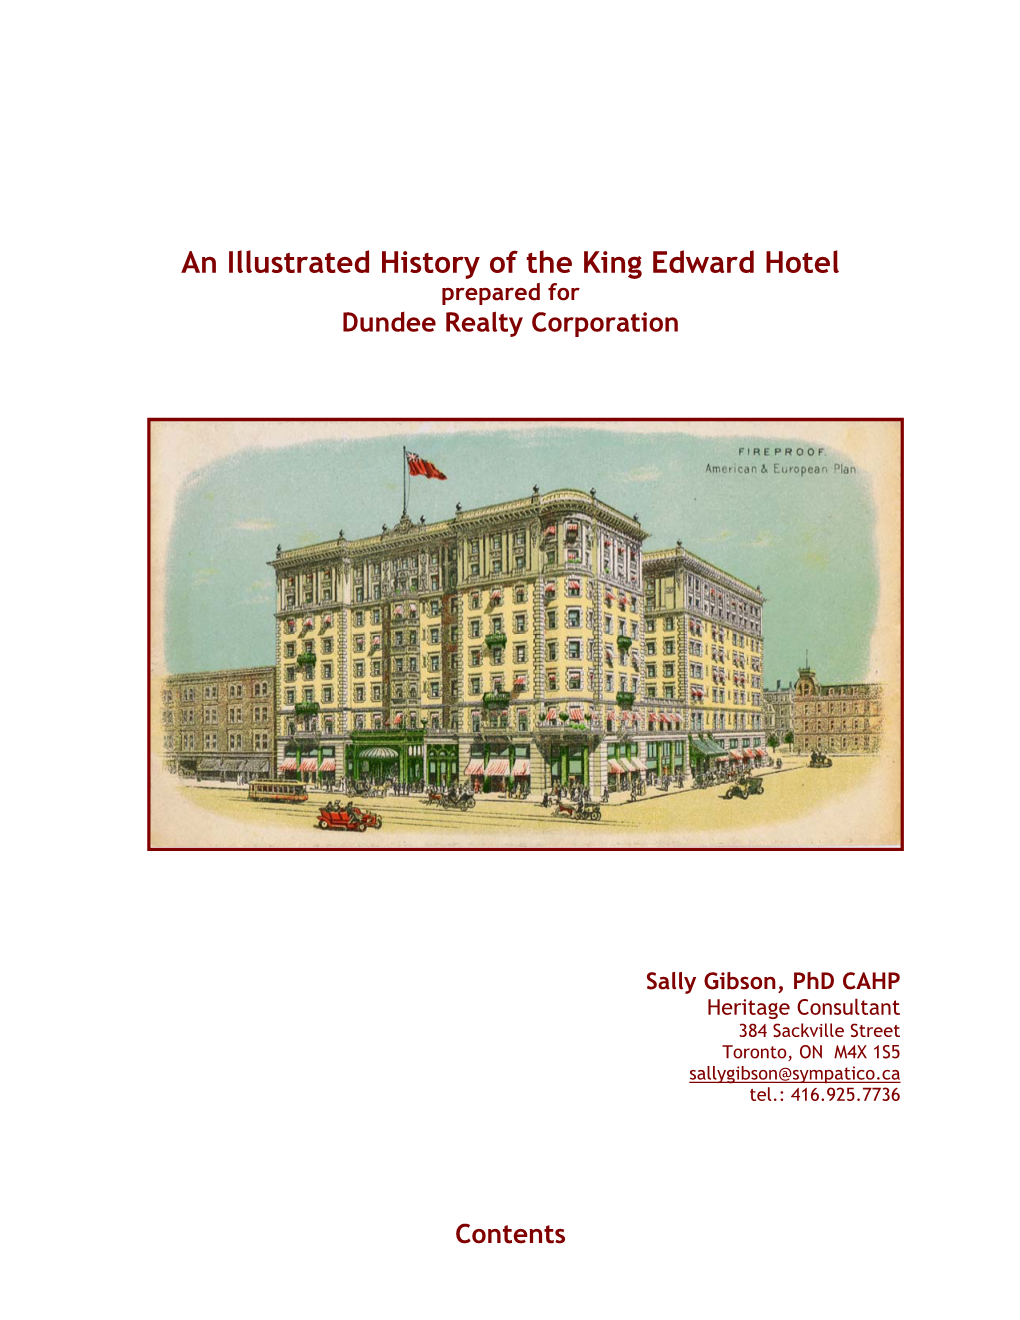 An Illustrated History of the King Edward Hotel Prepared for Dundee Realty Corporation